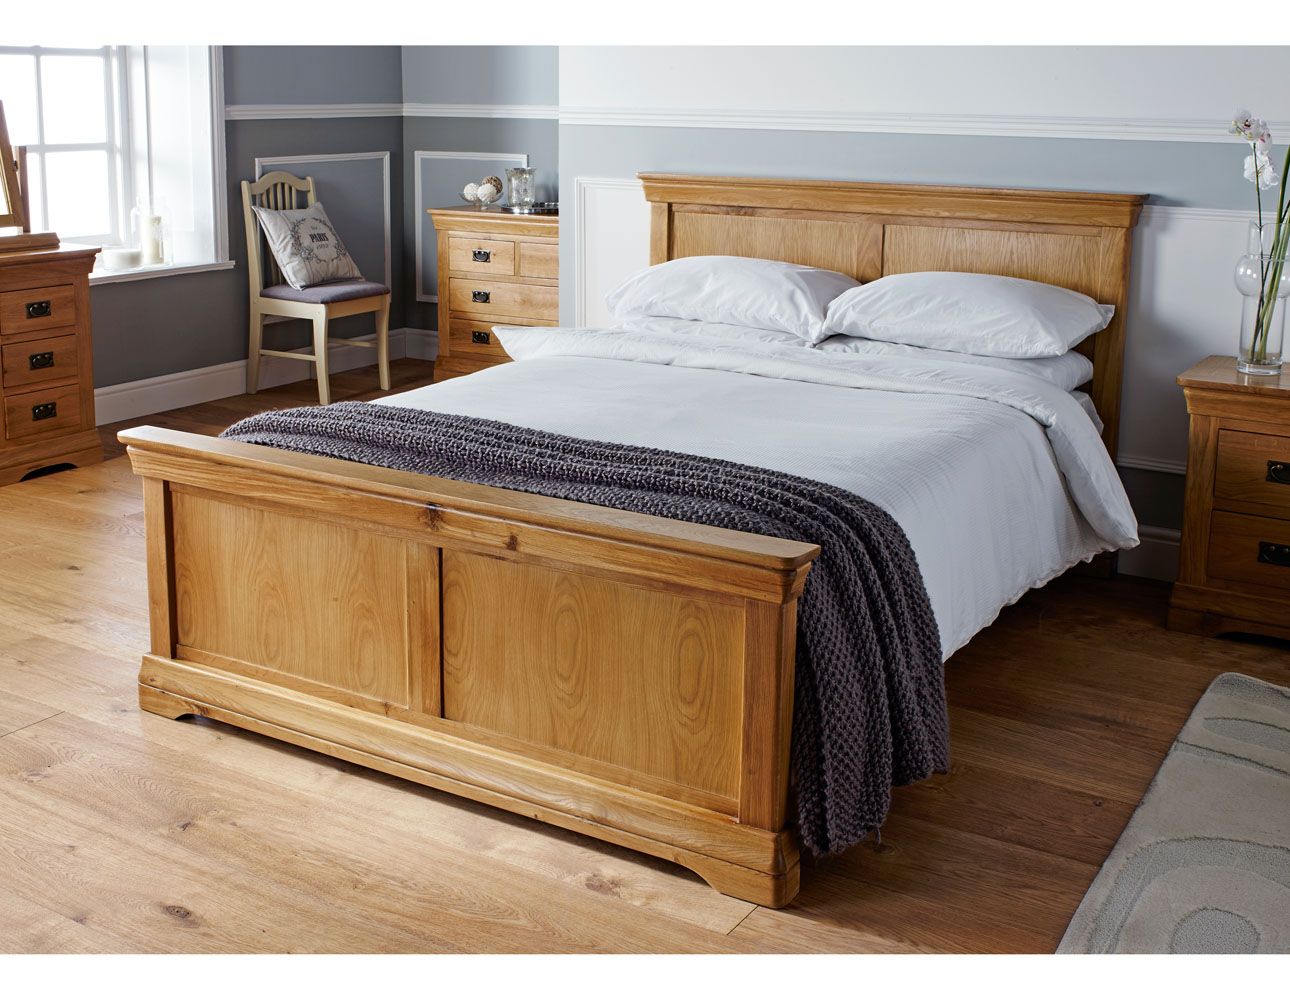 Farmhouse Country Oak Double Bed 4ft 6 inches - 10% OFF CODE SAVE